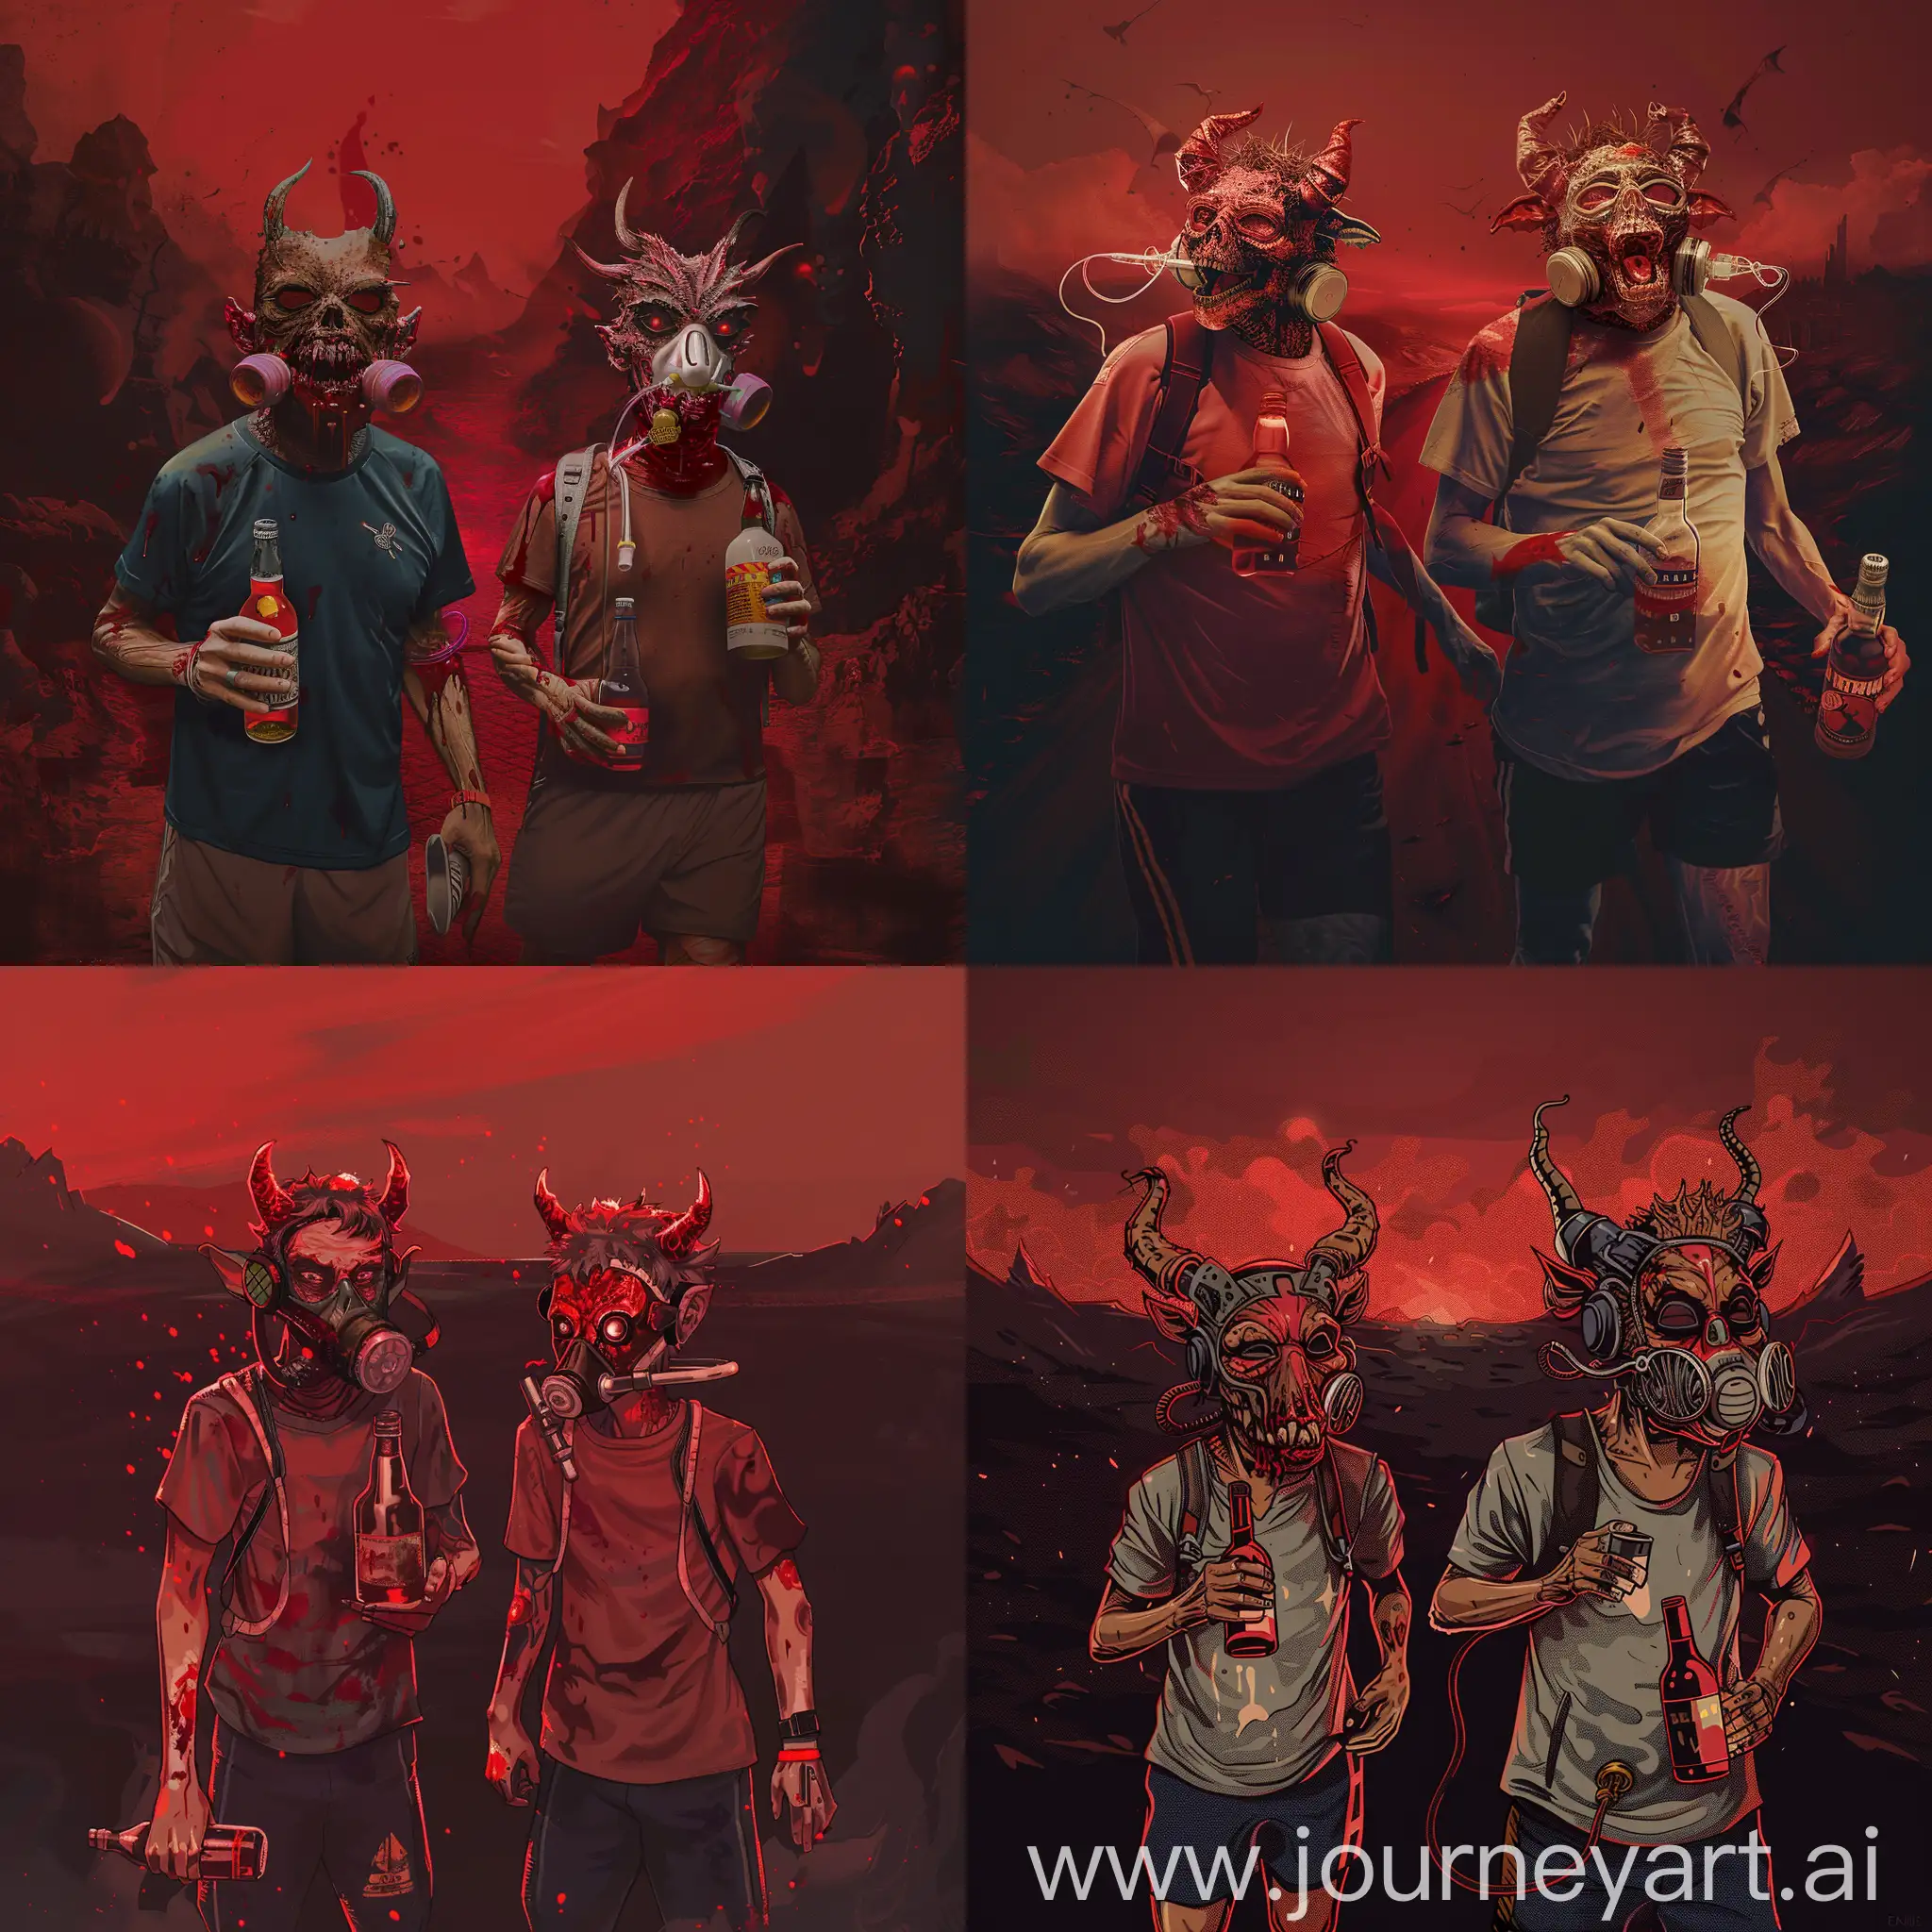 Creates a world in dark red and empty hell with 2 lost humans, the 2 humans wear a demon mask and have a bottle of alcohol in their hands, they are dressed in jogging t-shirts and one wears an oxygen mask